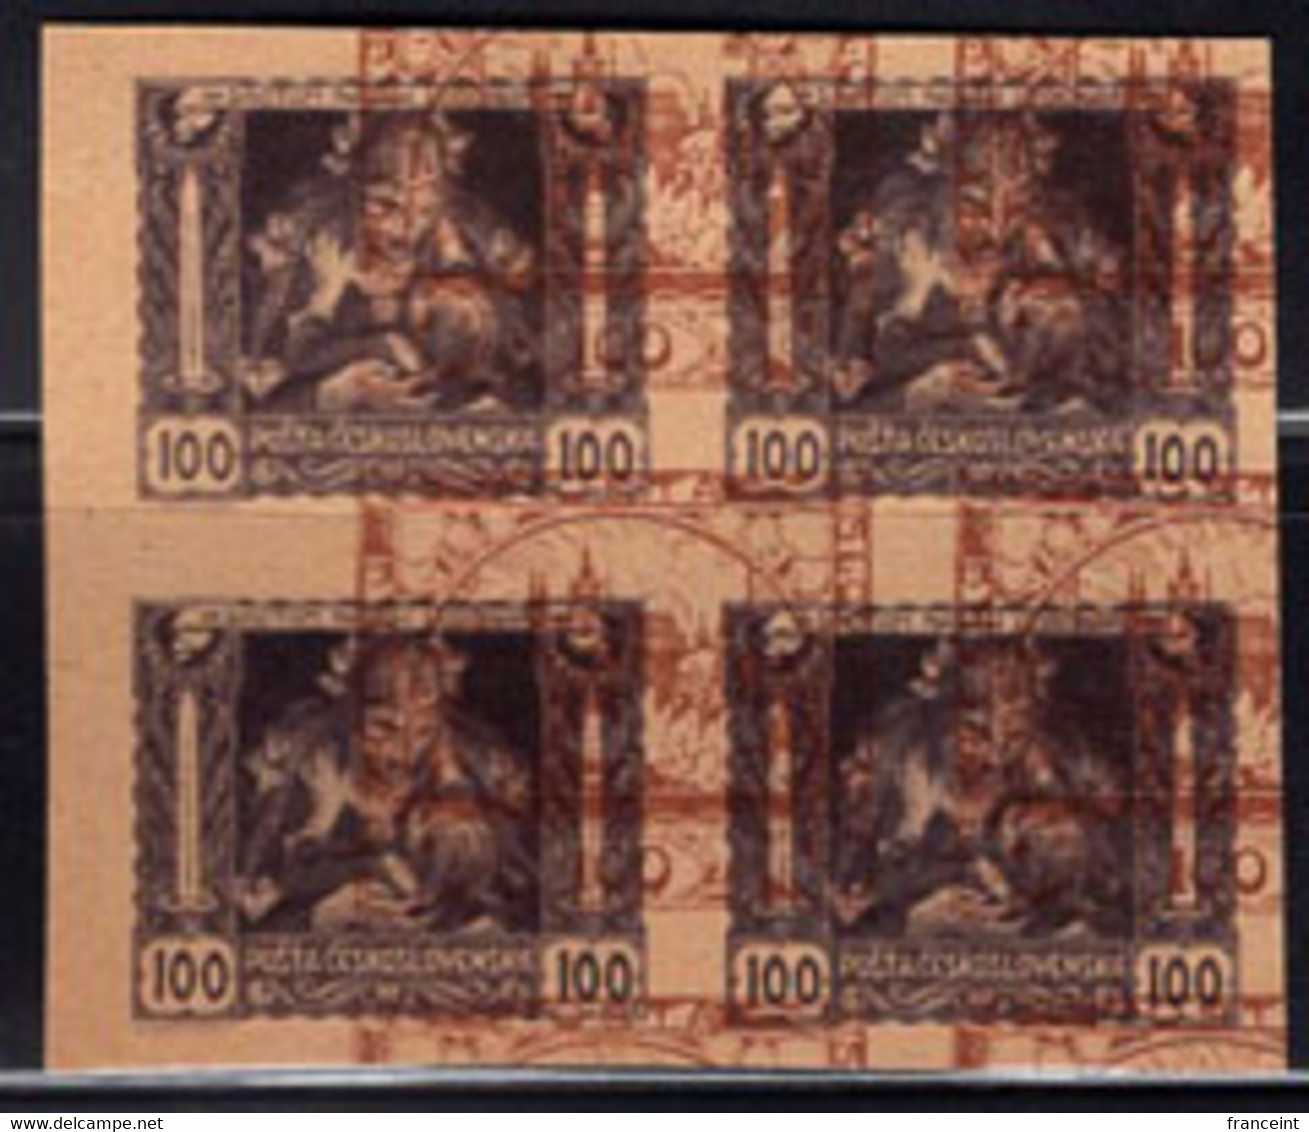 CZECHOSLOVAKIA(1919) Mother And Child. Block Of 4 Imperforate Proofs On Yellow Paper With Overlay Of Hradcany - Proofs & Reprints